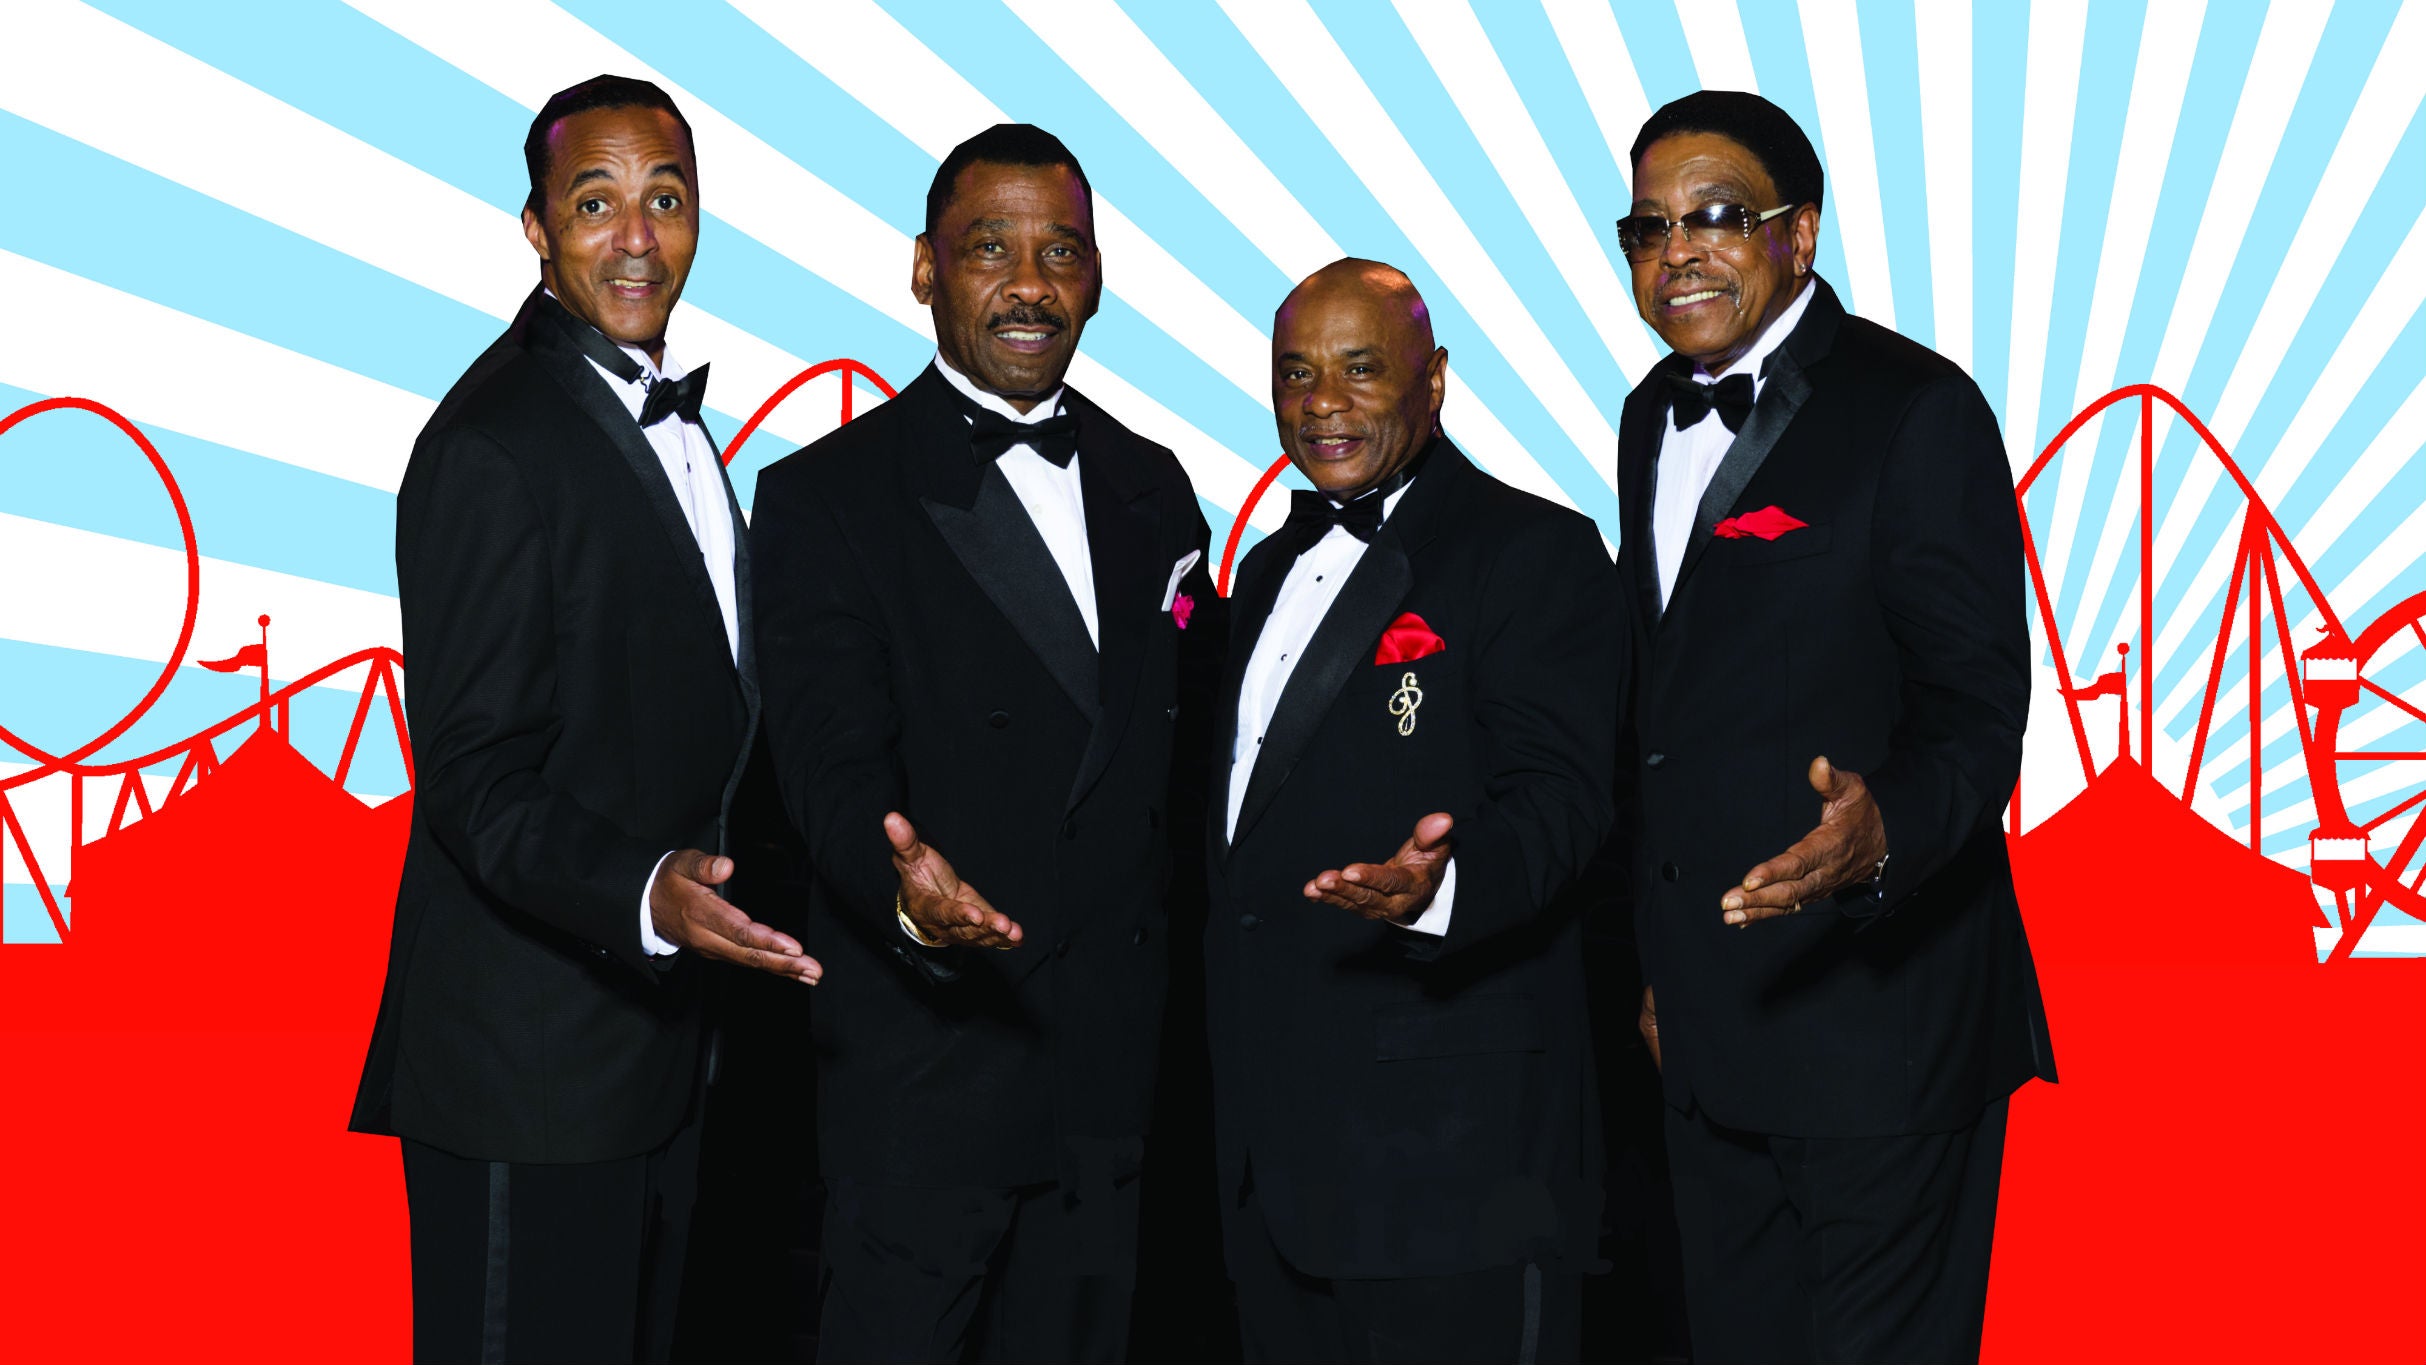 The Drifters at Blue Gate Performing Arts Center